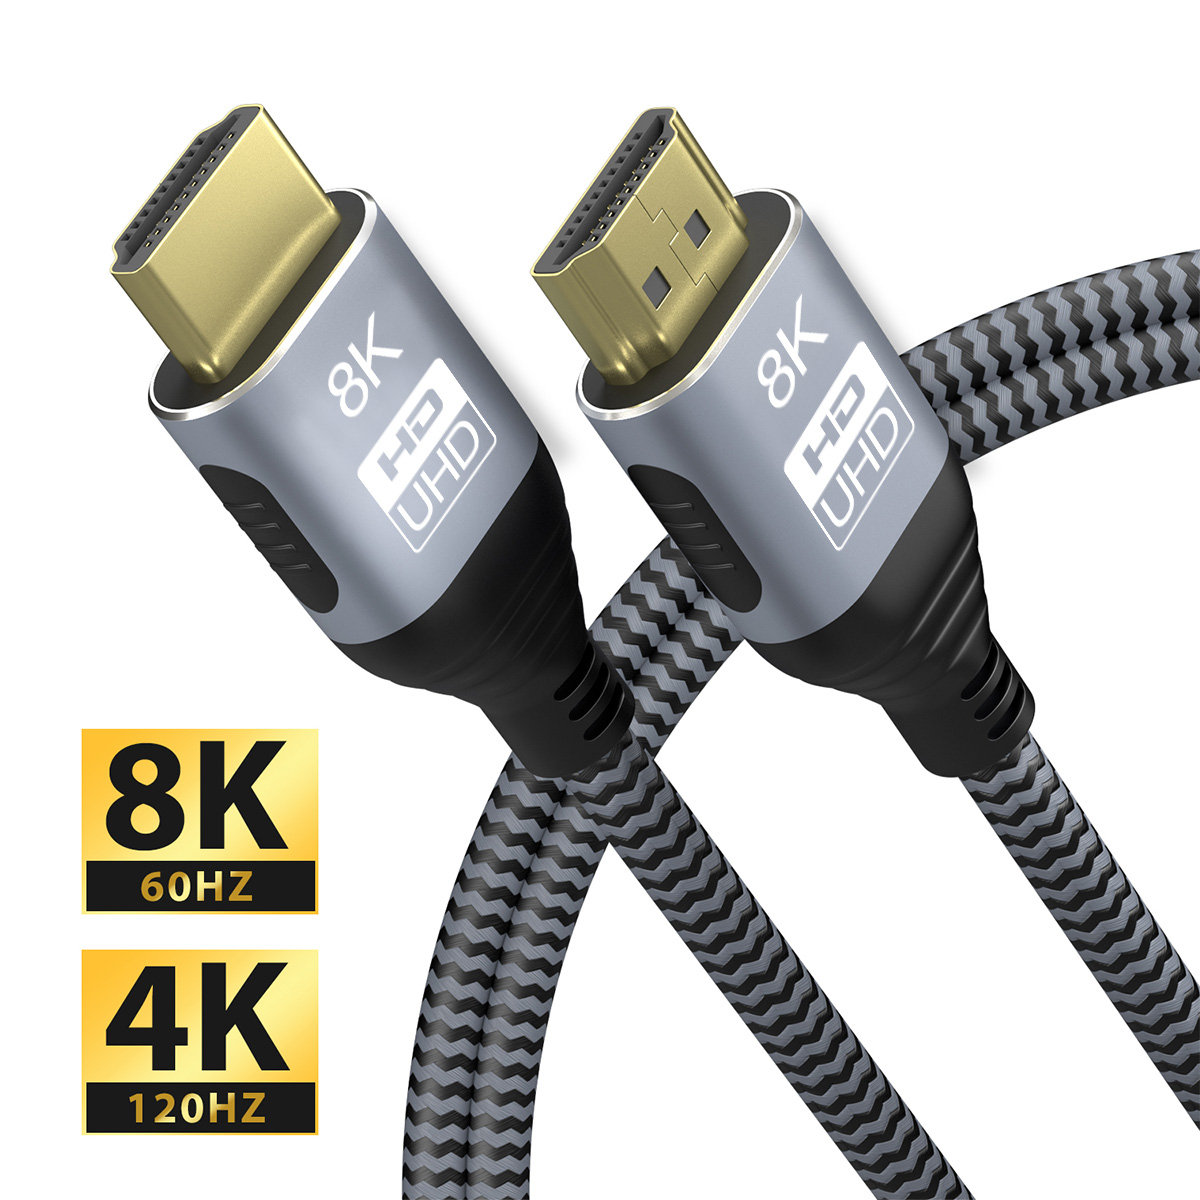 8k Hdmi Cable 48gbps 2.1,8K&60Hz 4K@120Hz 7680x4320 UHD Compatible with LG  TV Samsung QLED TV Apple TV Gaming Consoles Blu-Ray Players Projectors Any  Other Hdmi-Enable Device 8k Cable hdmi,30m 100ft 